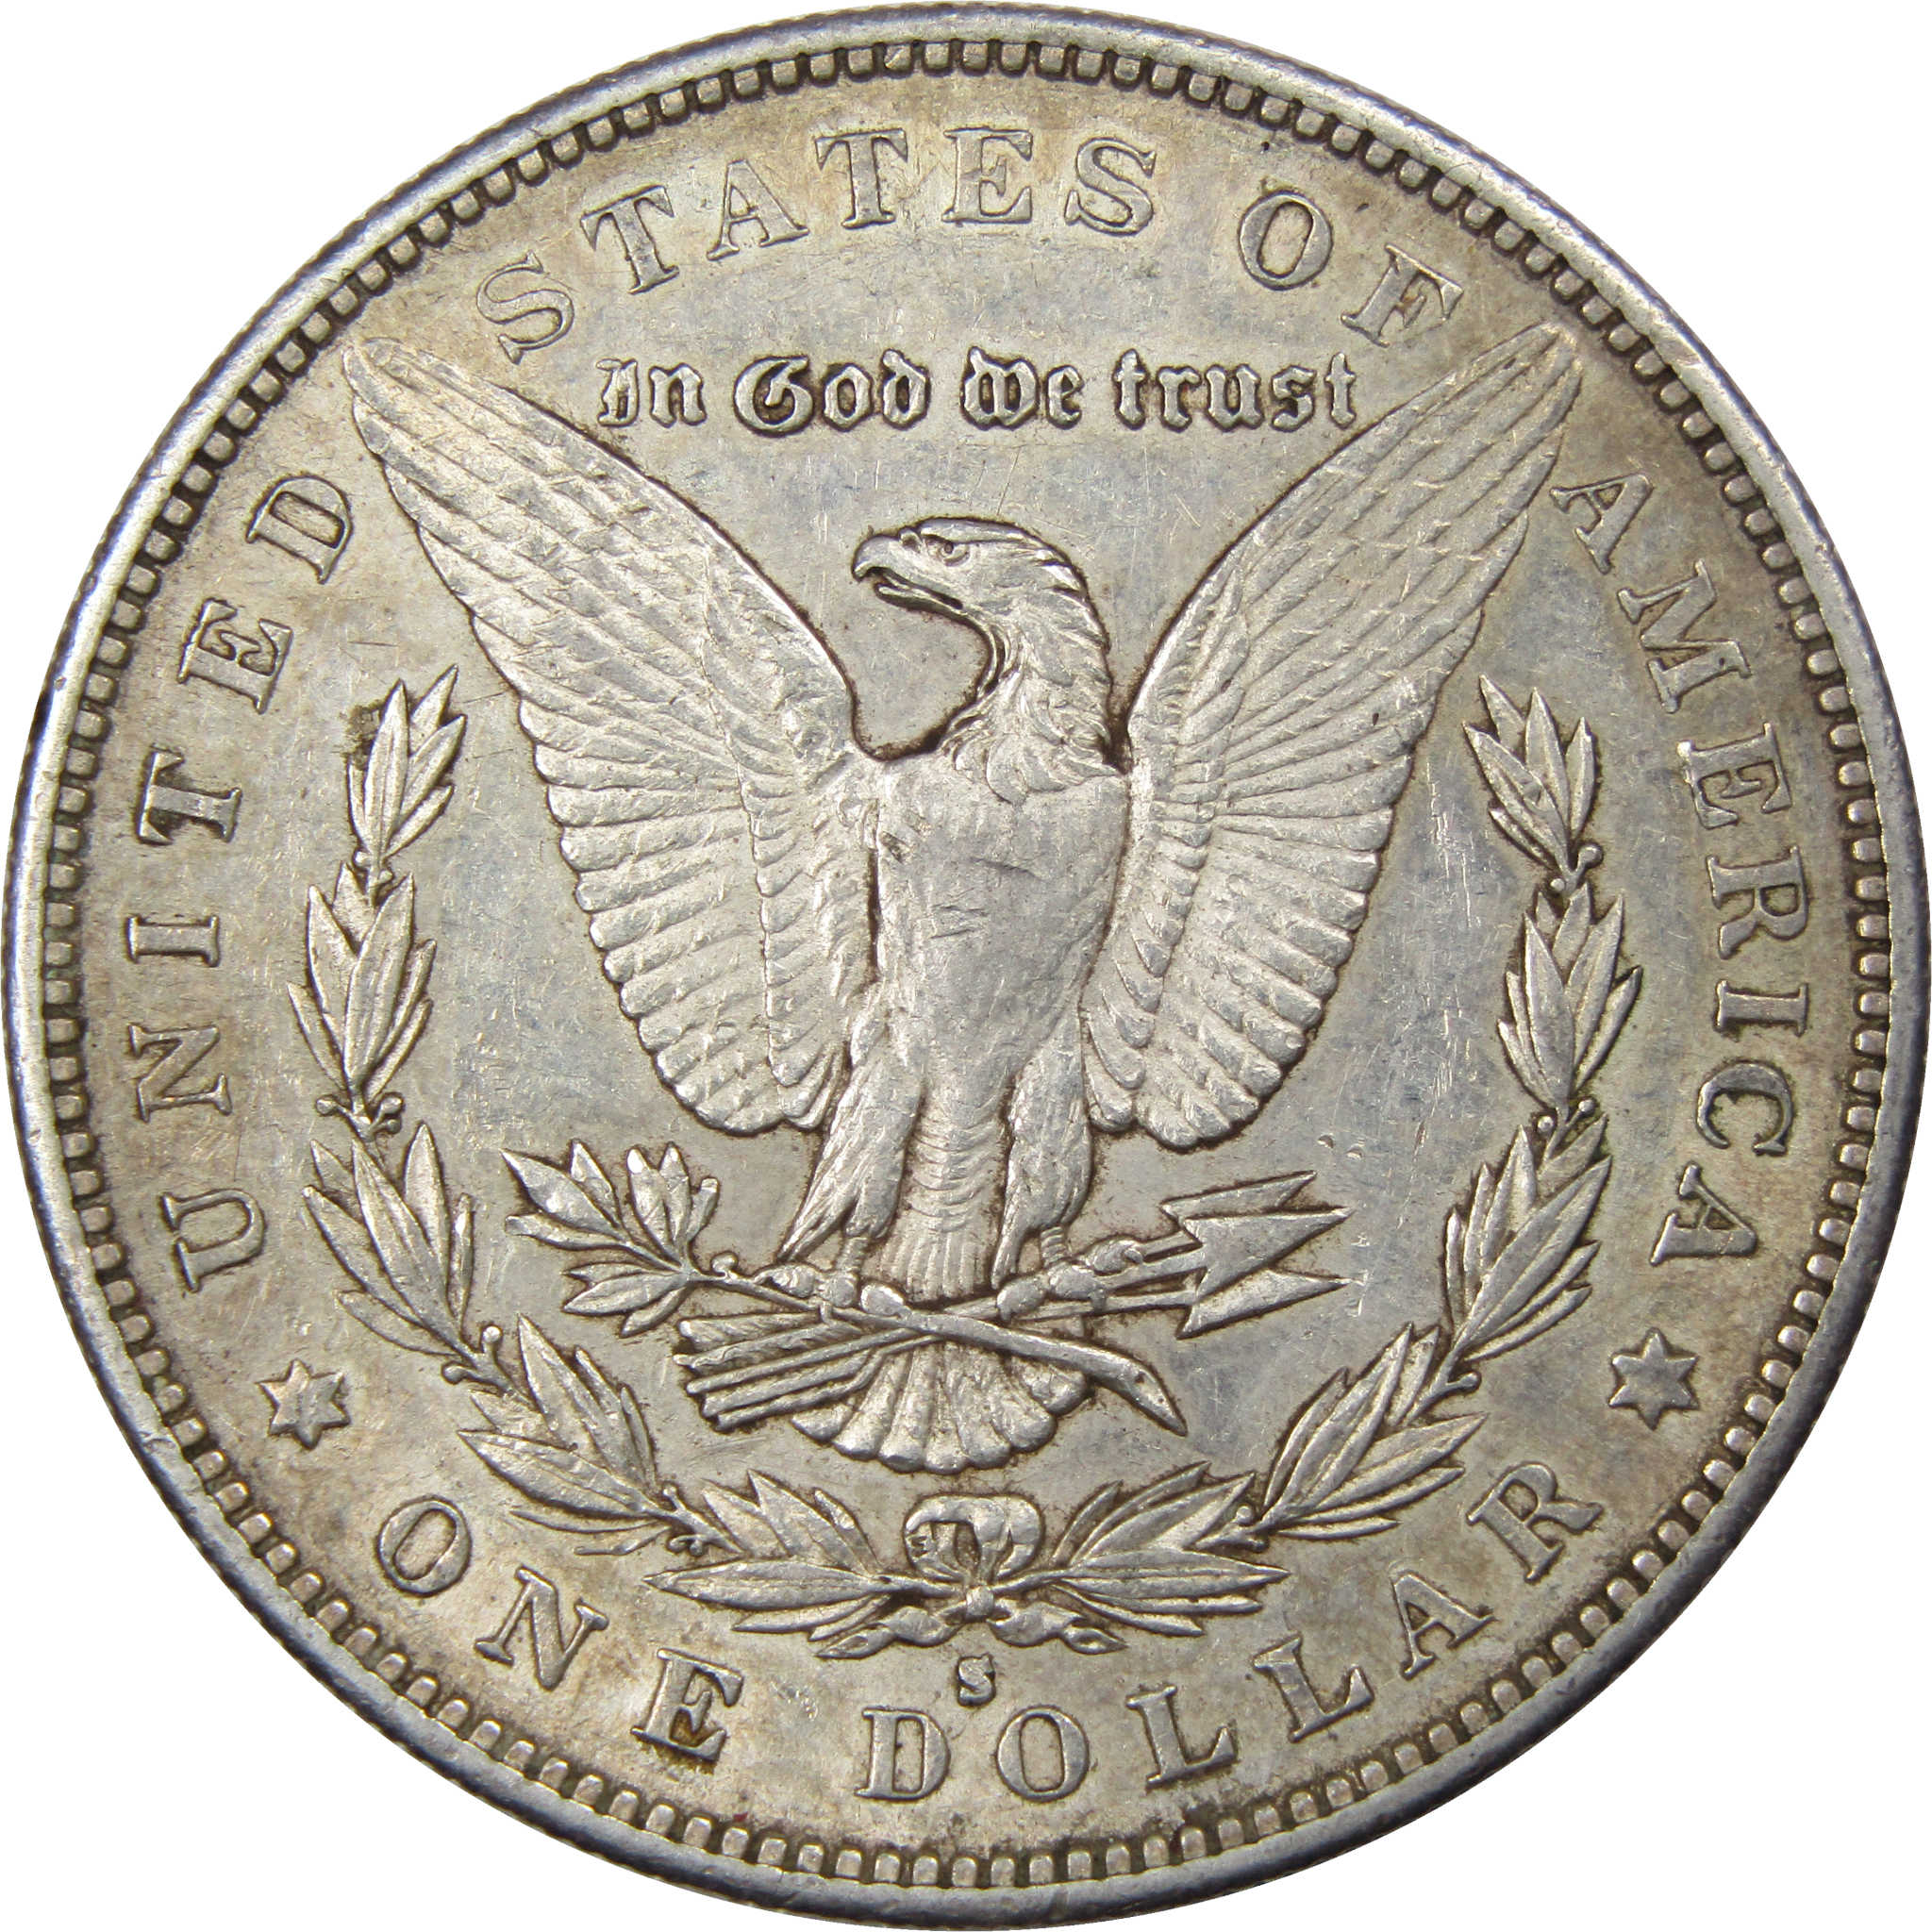 1890 S Morgan Dollar XF EF Extremely Fine 90% Silver Coin SKU:I1552 - Morgan coin - Morgan silver dollar - Morgan silver dollar for sale - Profile Coins &amp; Collectibles